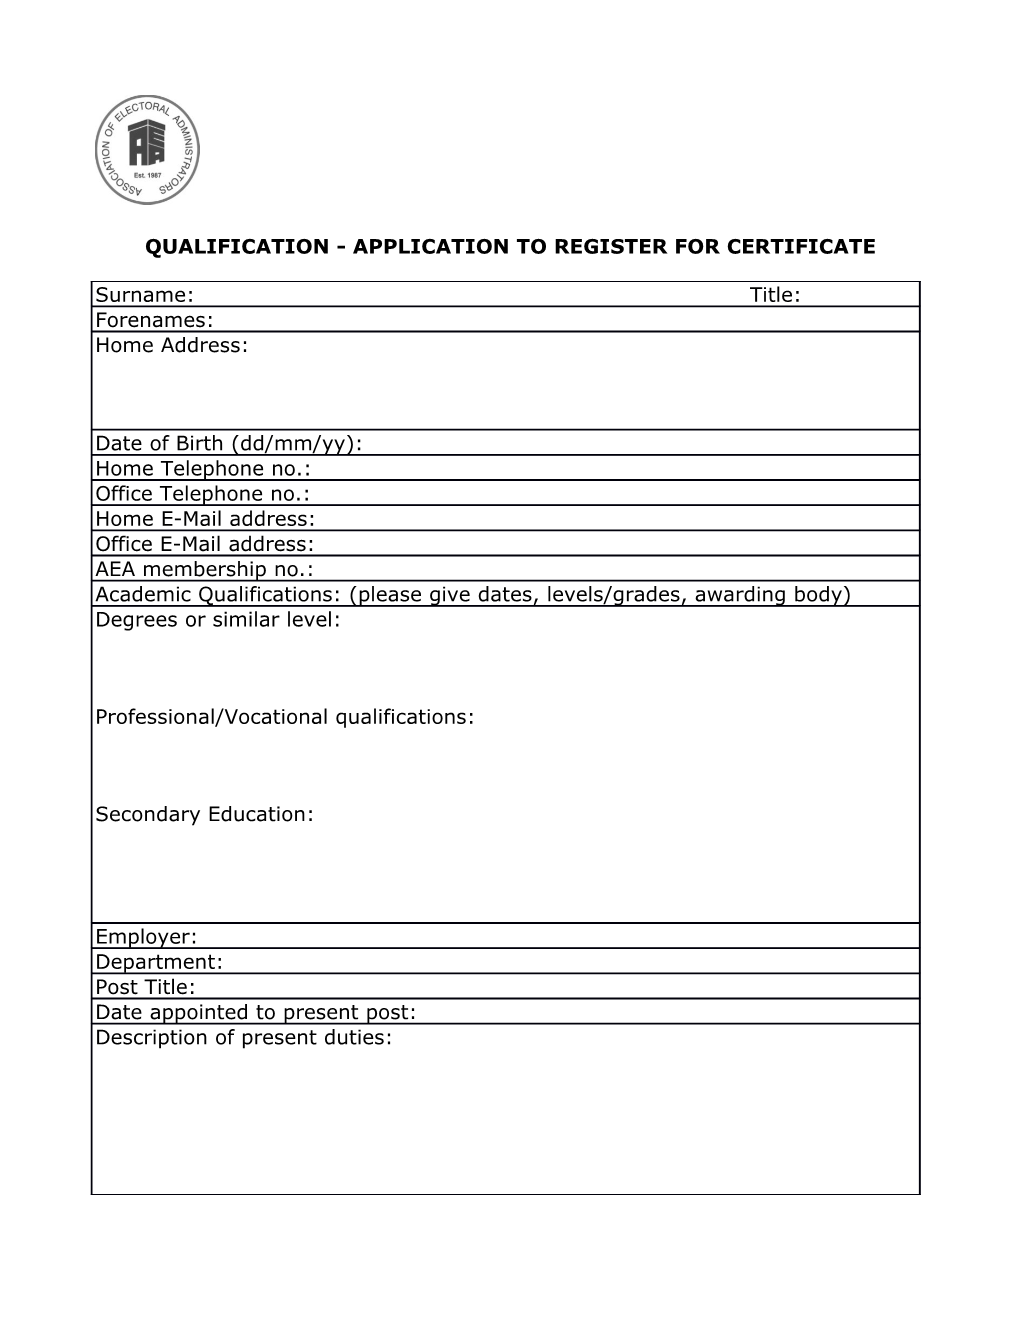 Qualification - Application to Register for Certificate